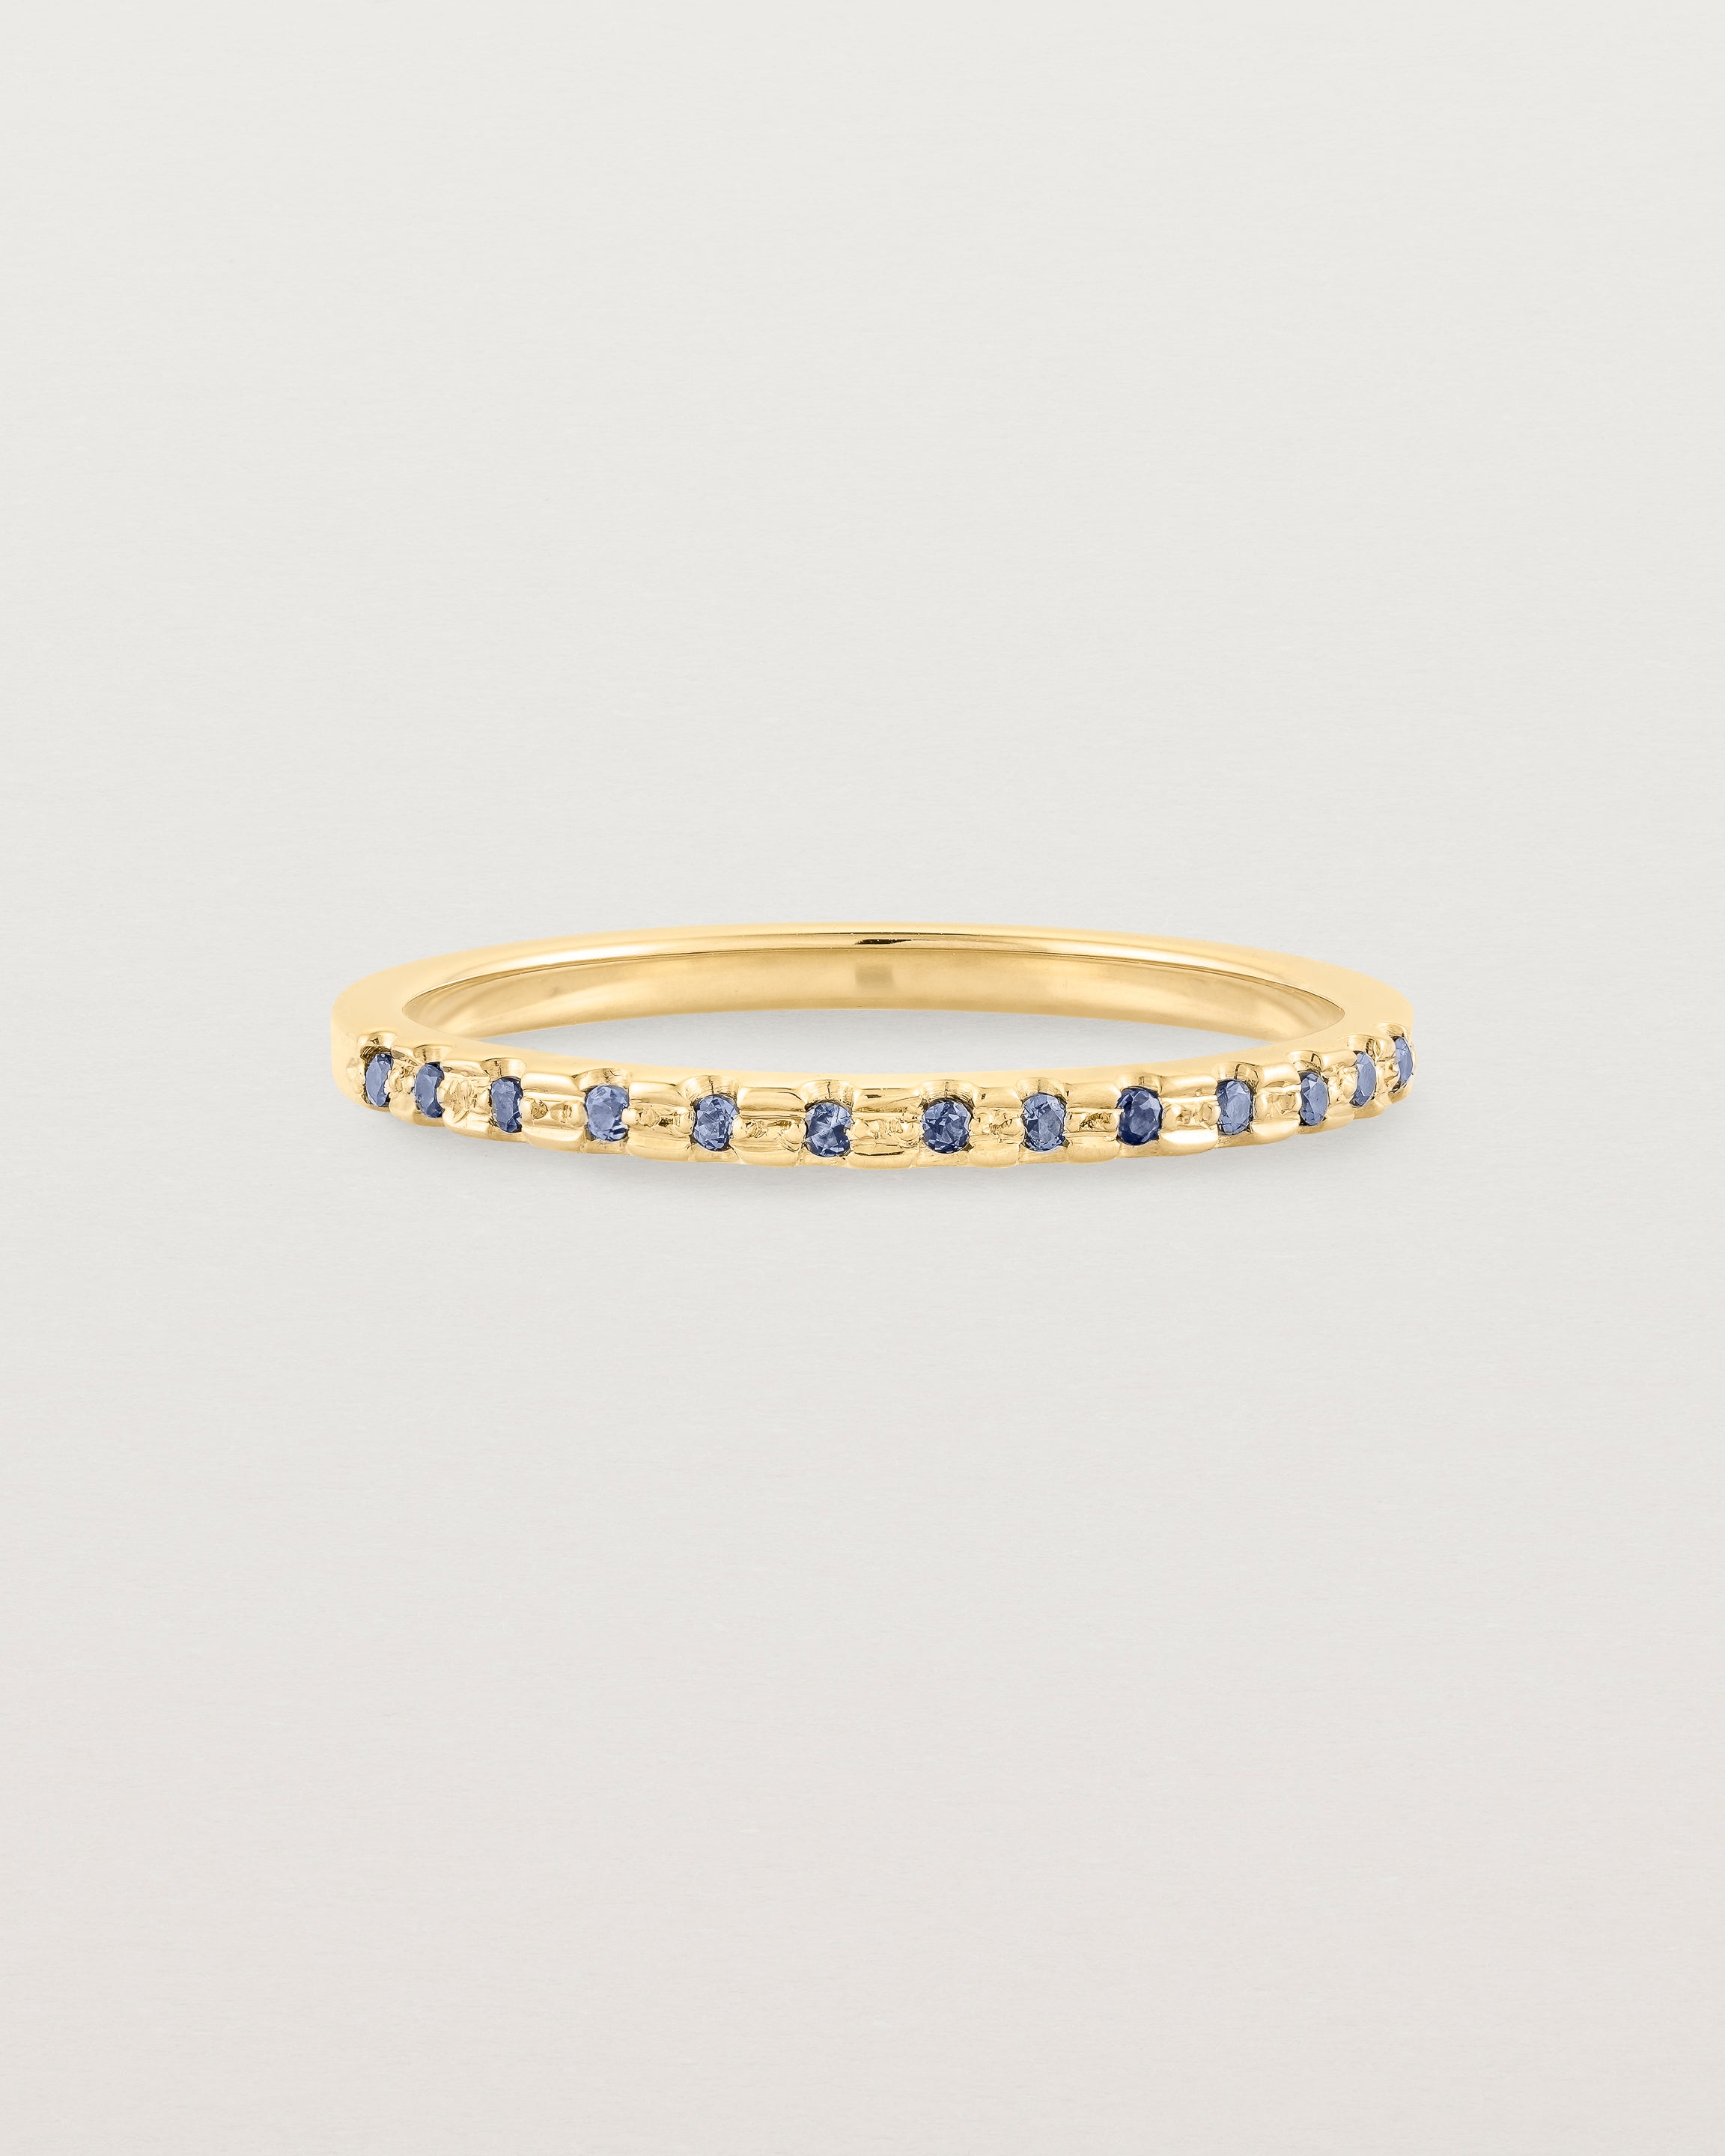 A fine yellow gold wedding ring with thirteen blue sapphires